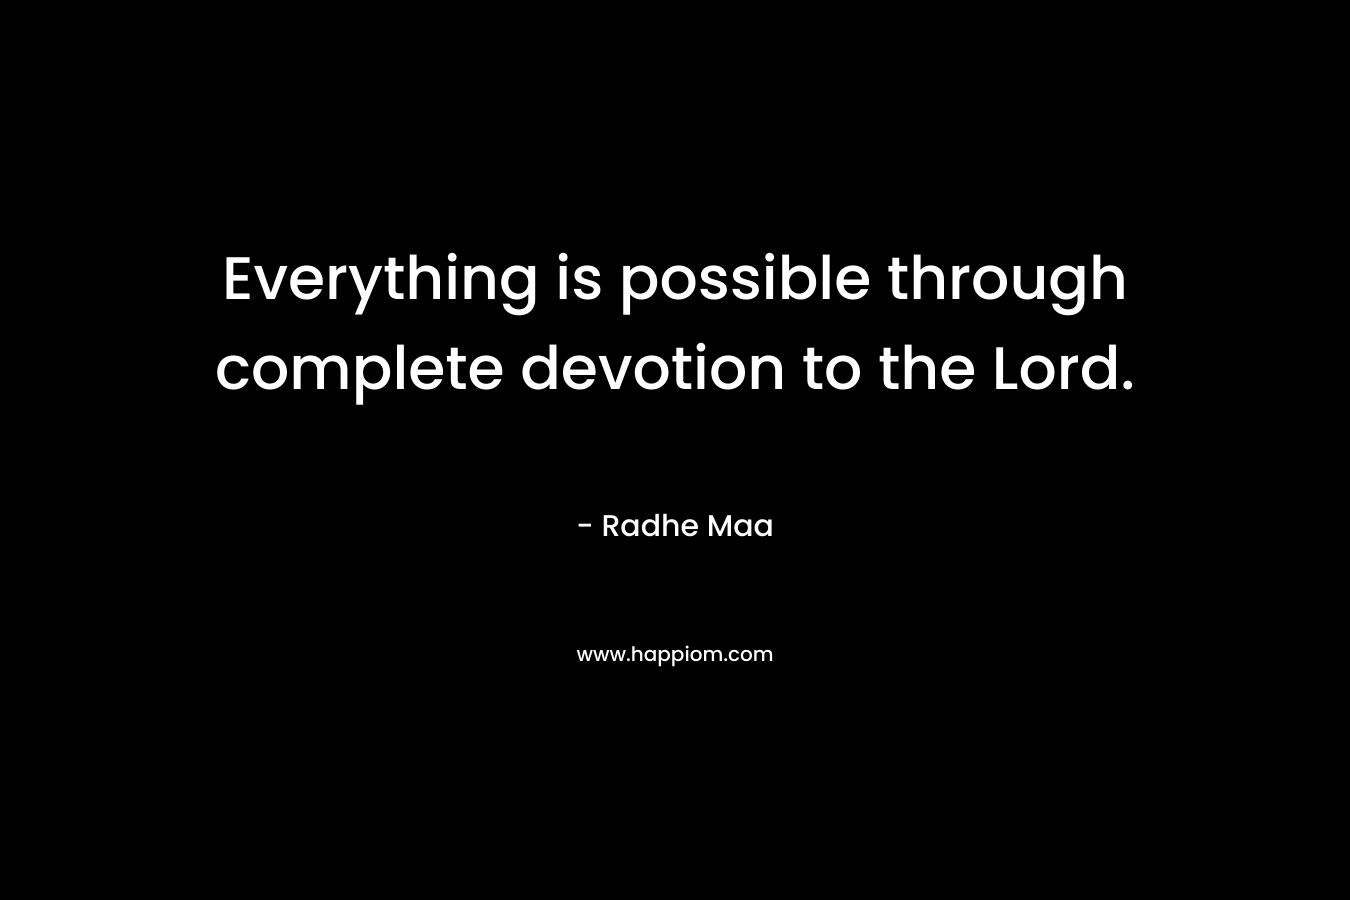 Everything is possible through complete devotion to the Lord.